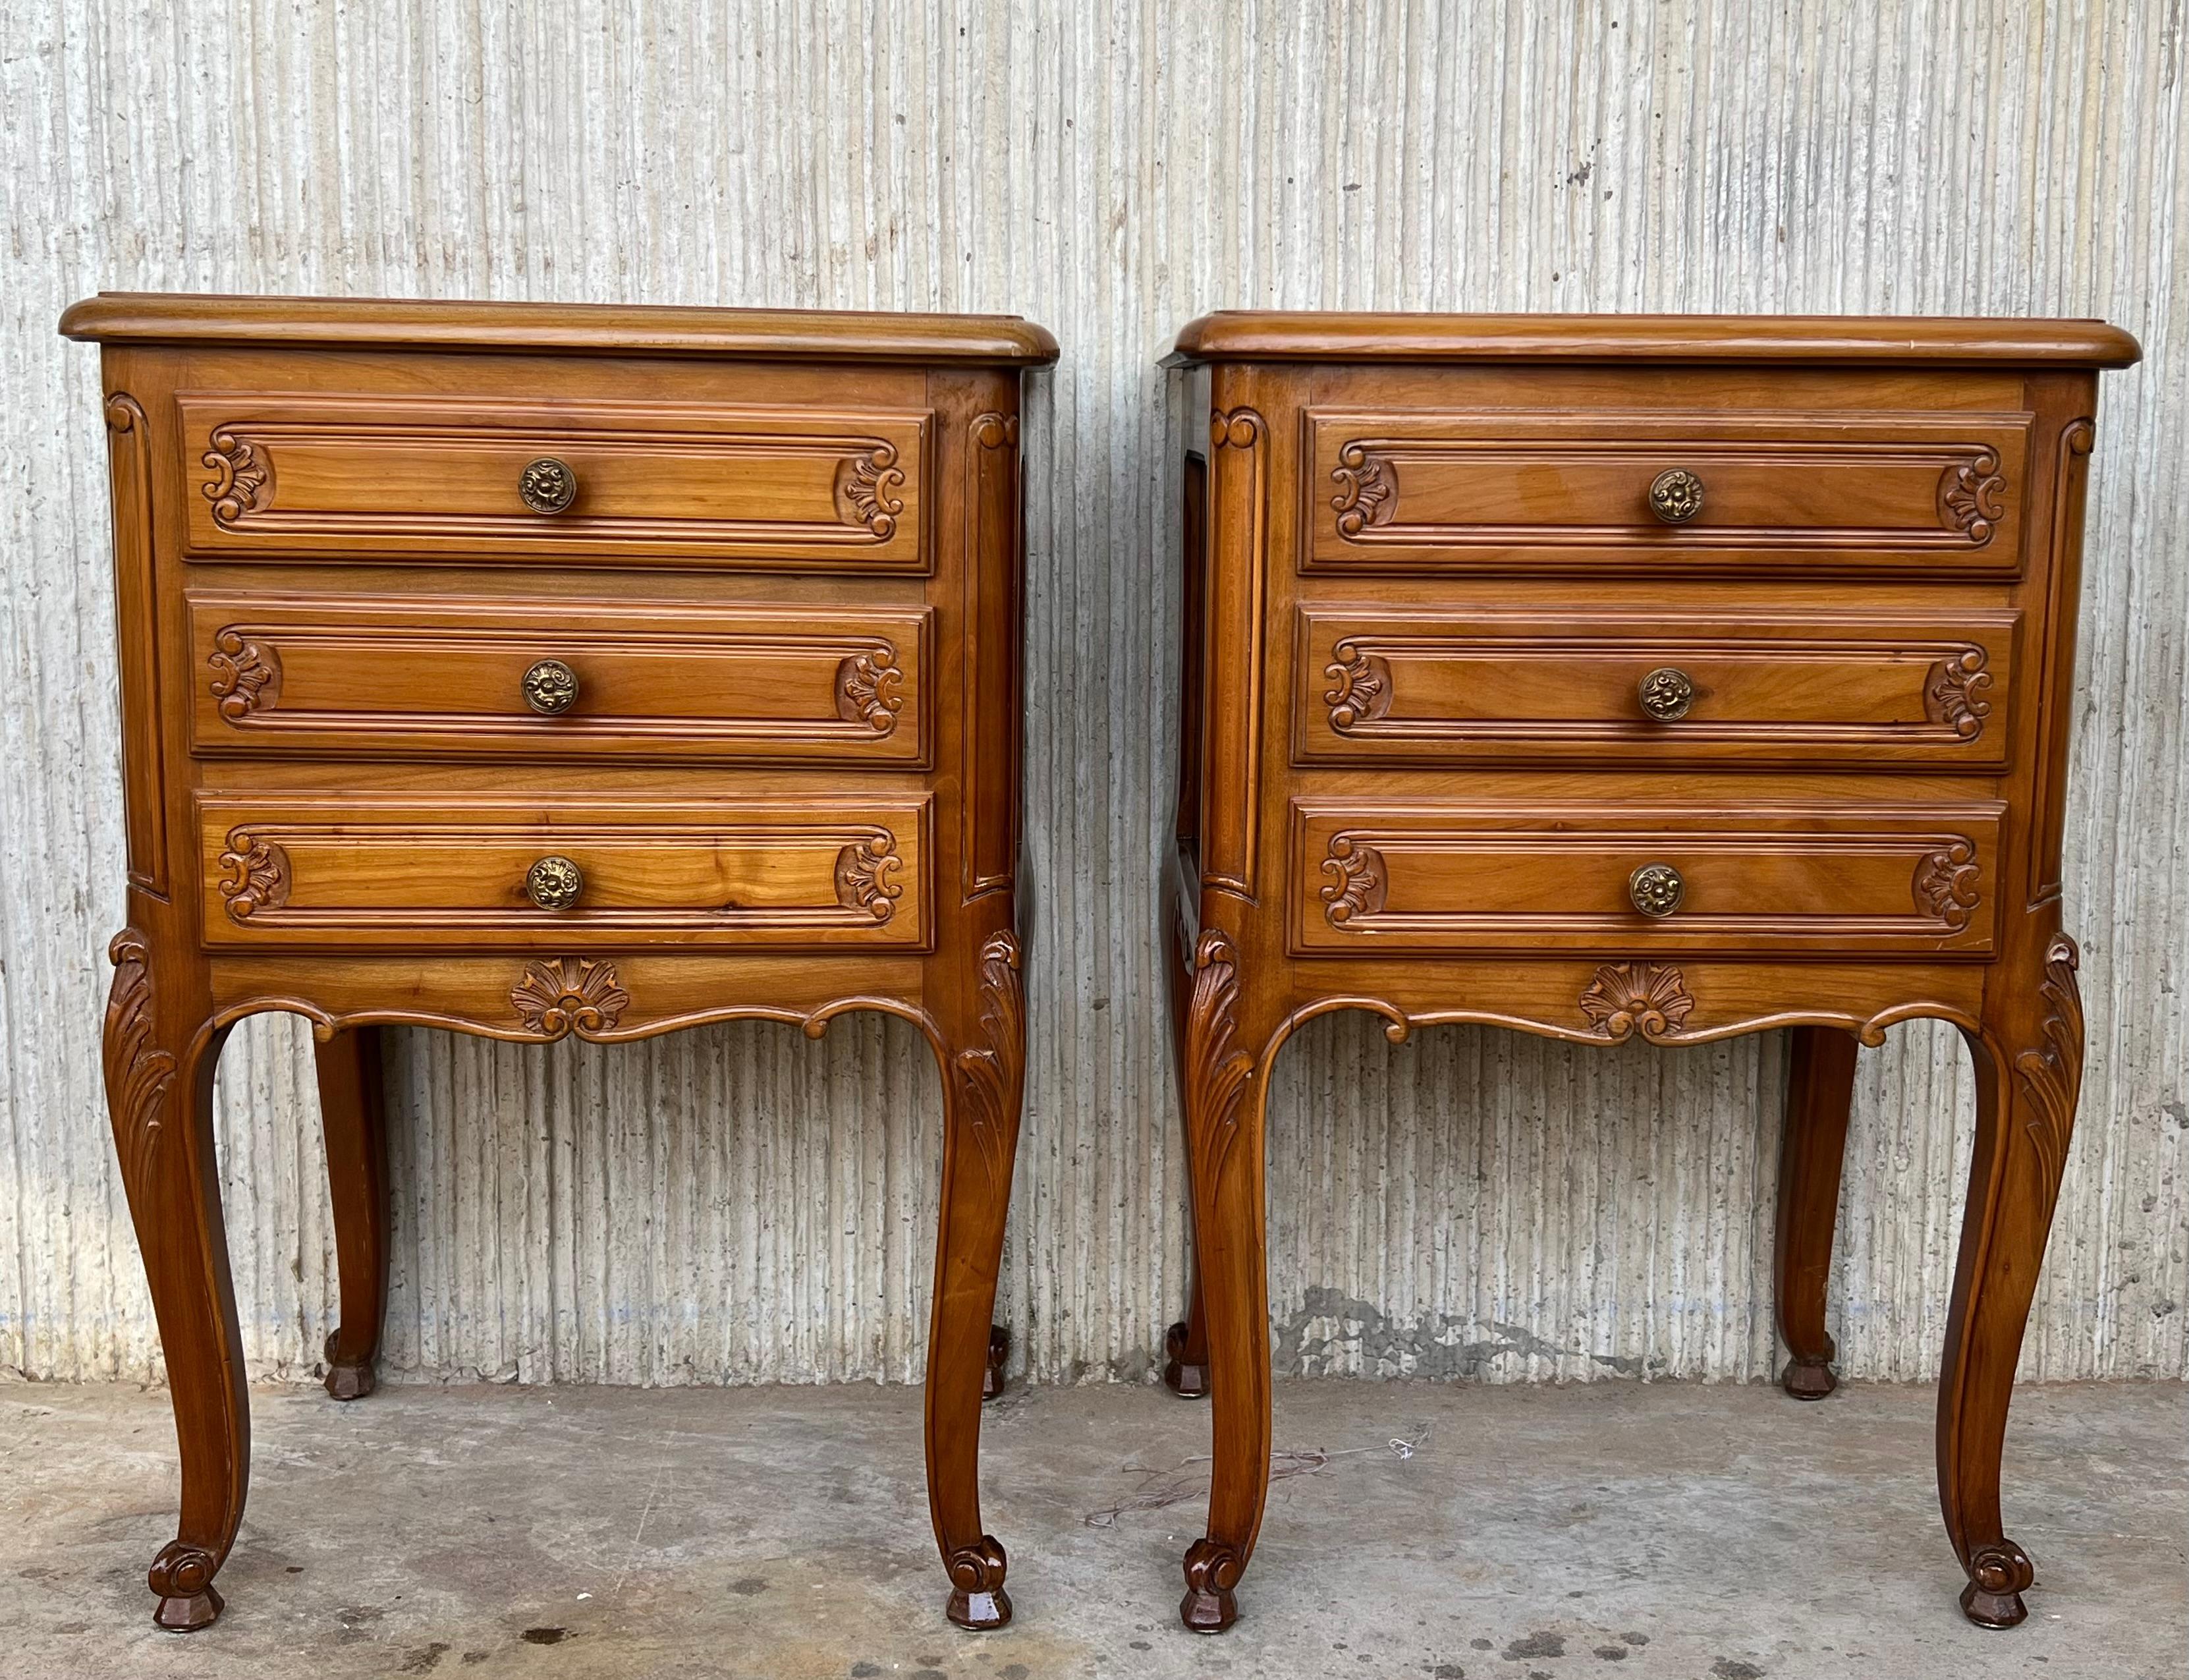 Antique Country French nightstands are the ideal combination of size, form and function, making it perfect for a bedside companion, a little storage in the office, or in the family room for magazines, remotes, and a lamp! Hand-crafted from solid